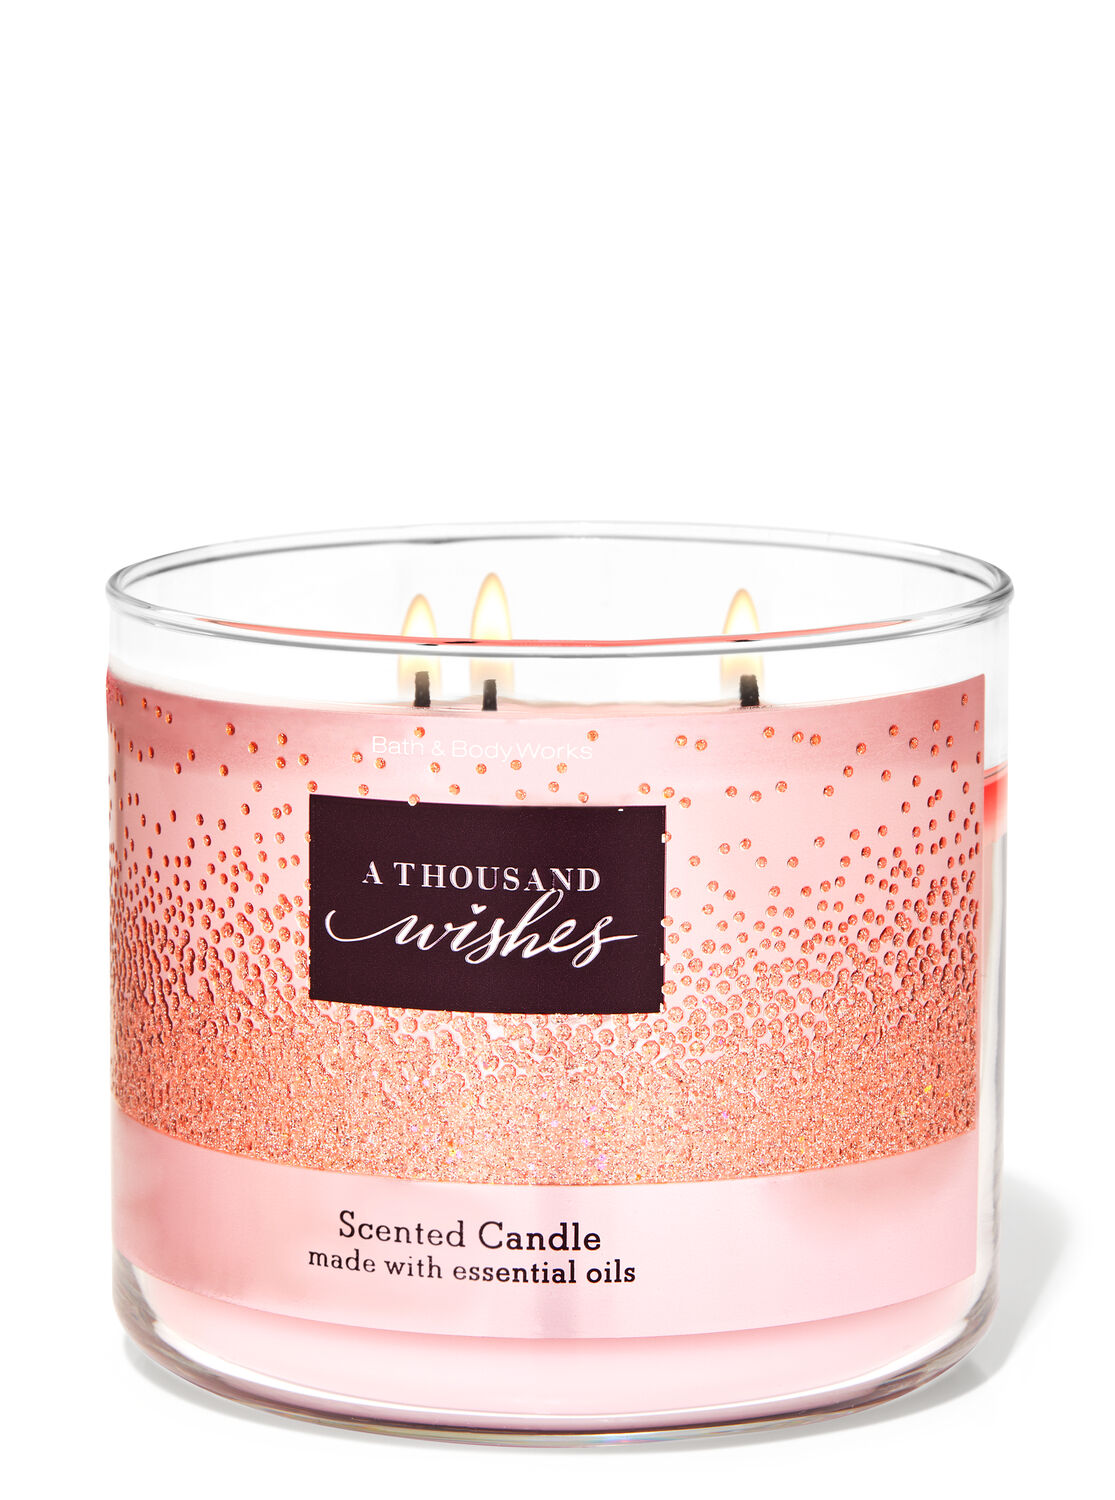 NEW * Bath and Body Works A THOUSAND WISHES 3-Wick Candle 14.5 oz 